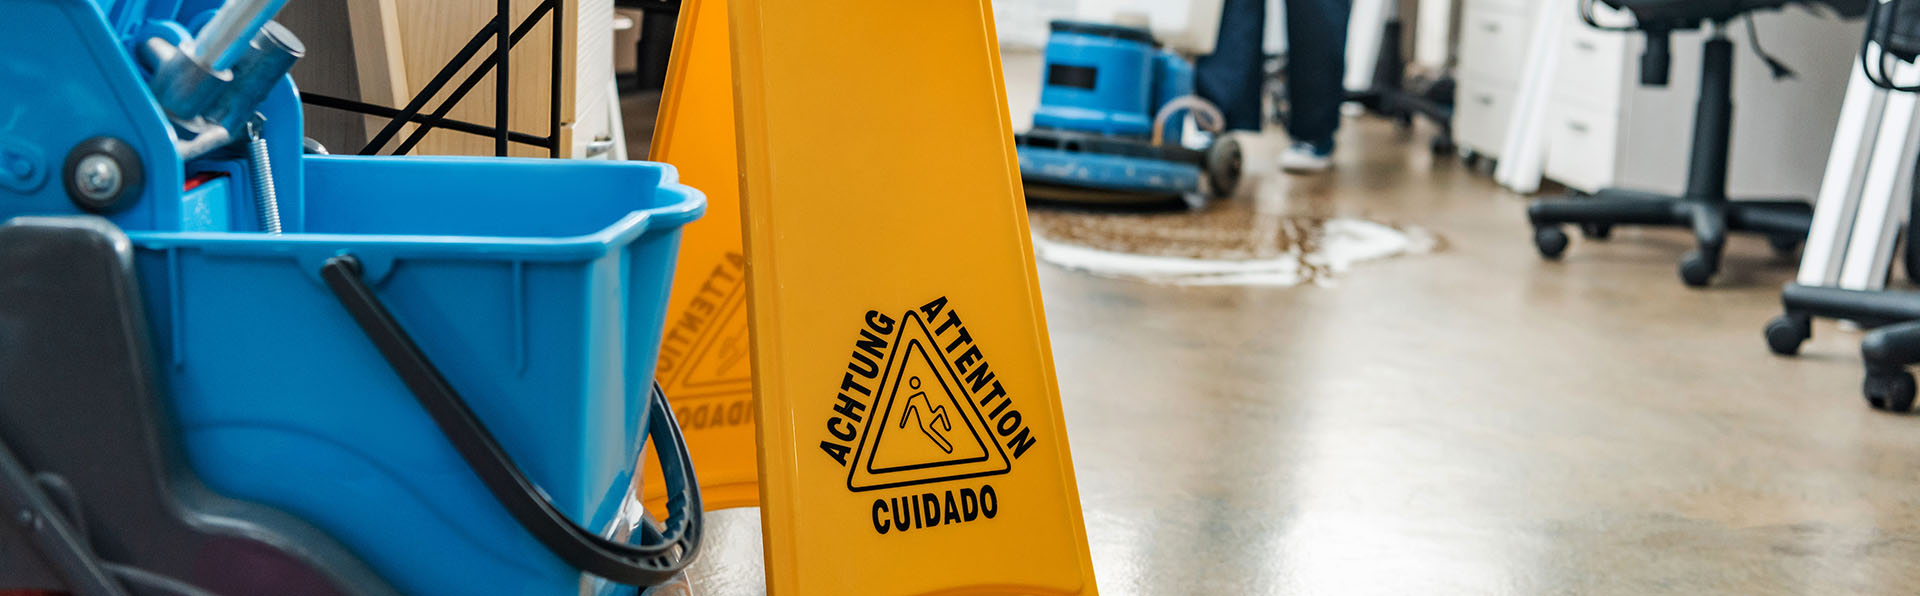 wet floor sign and commercial cleaning equipment